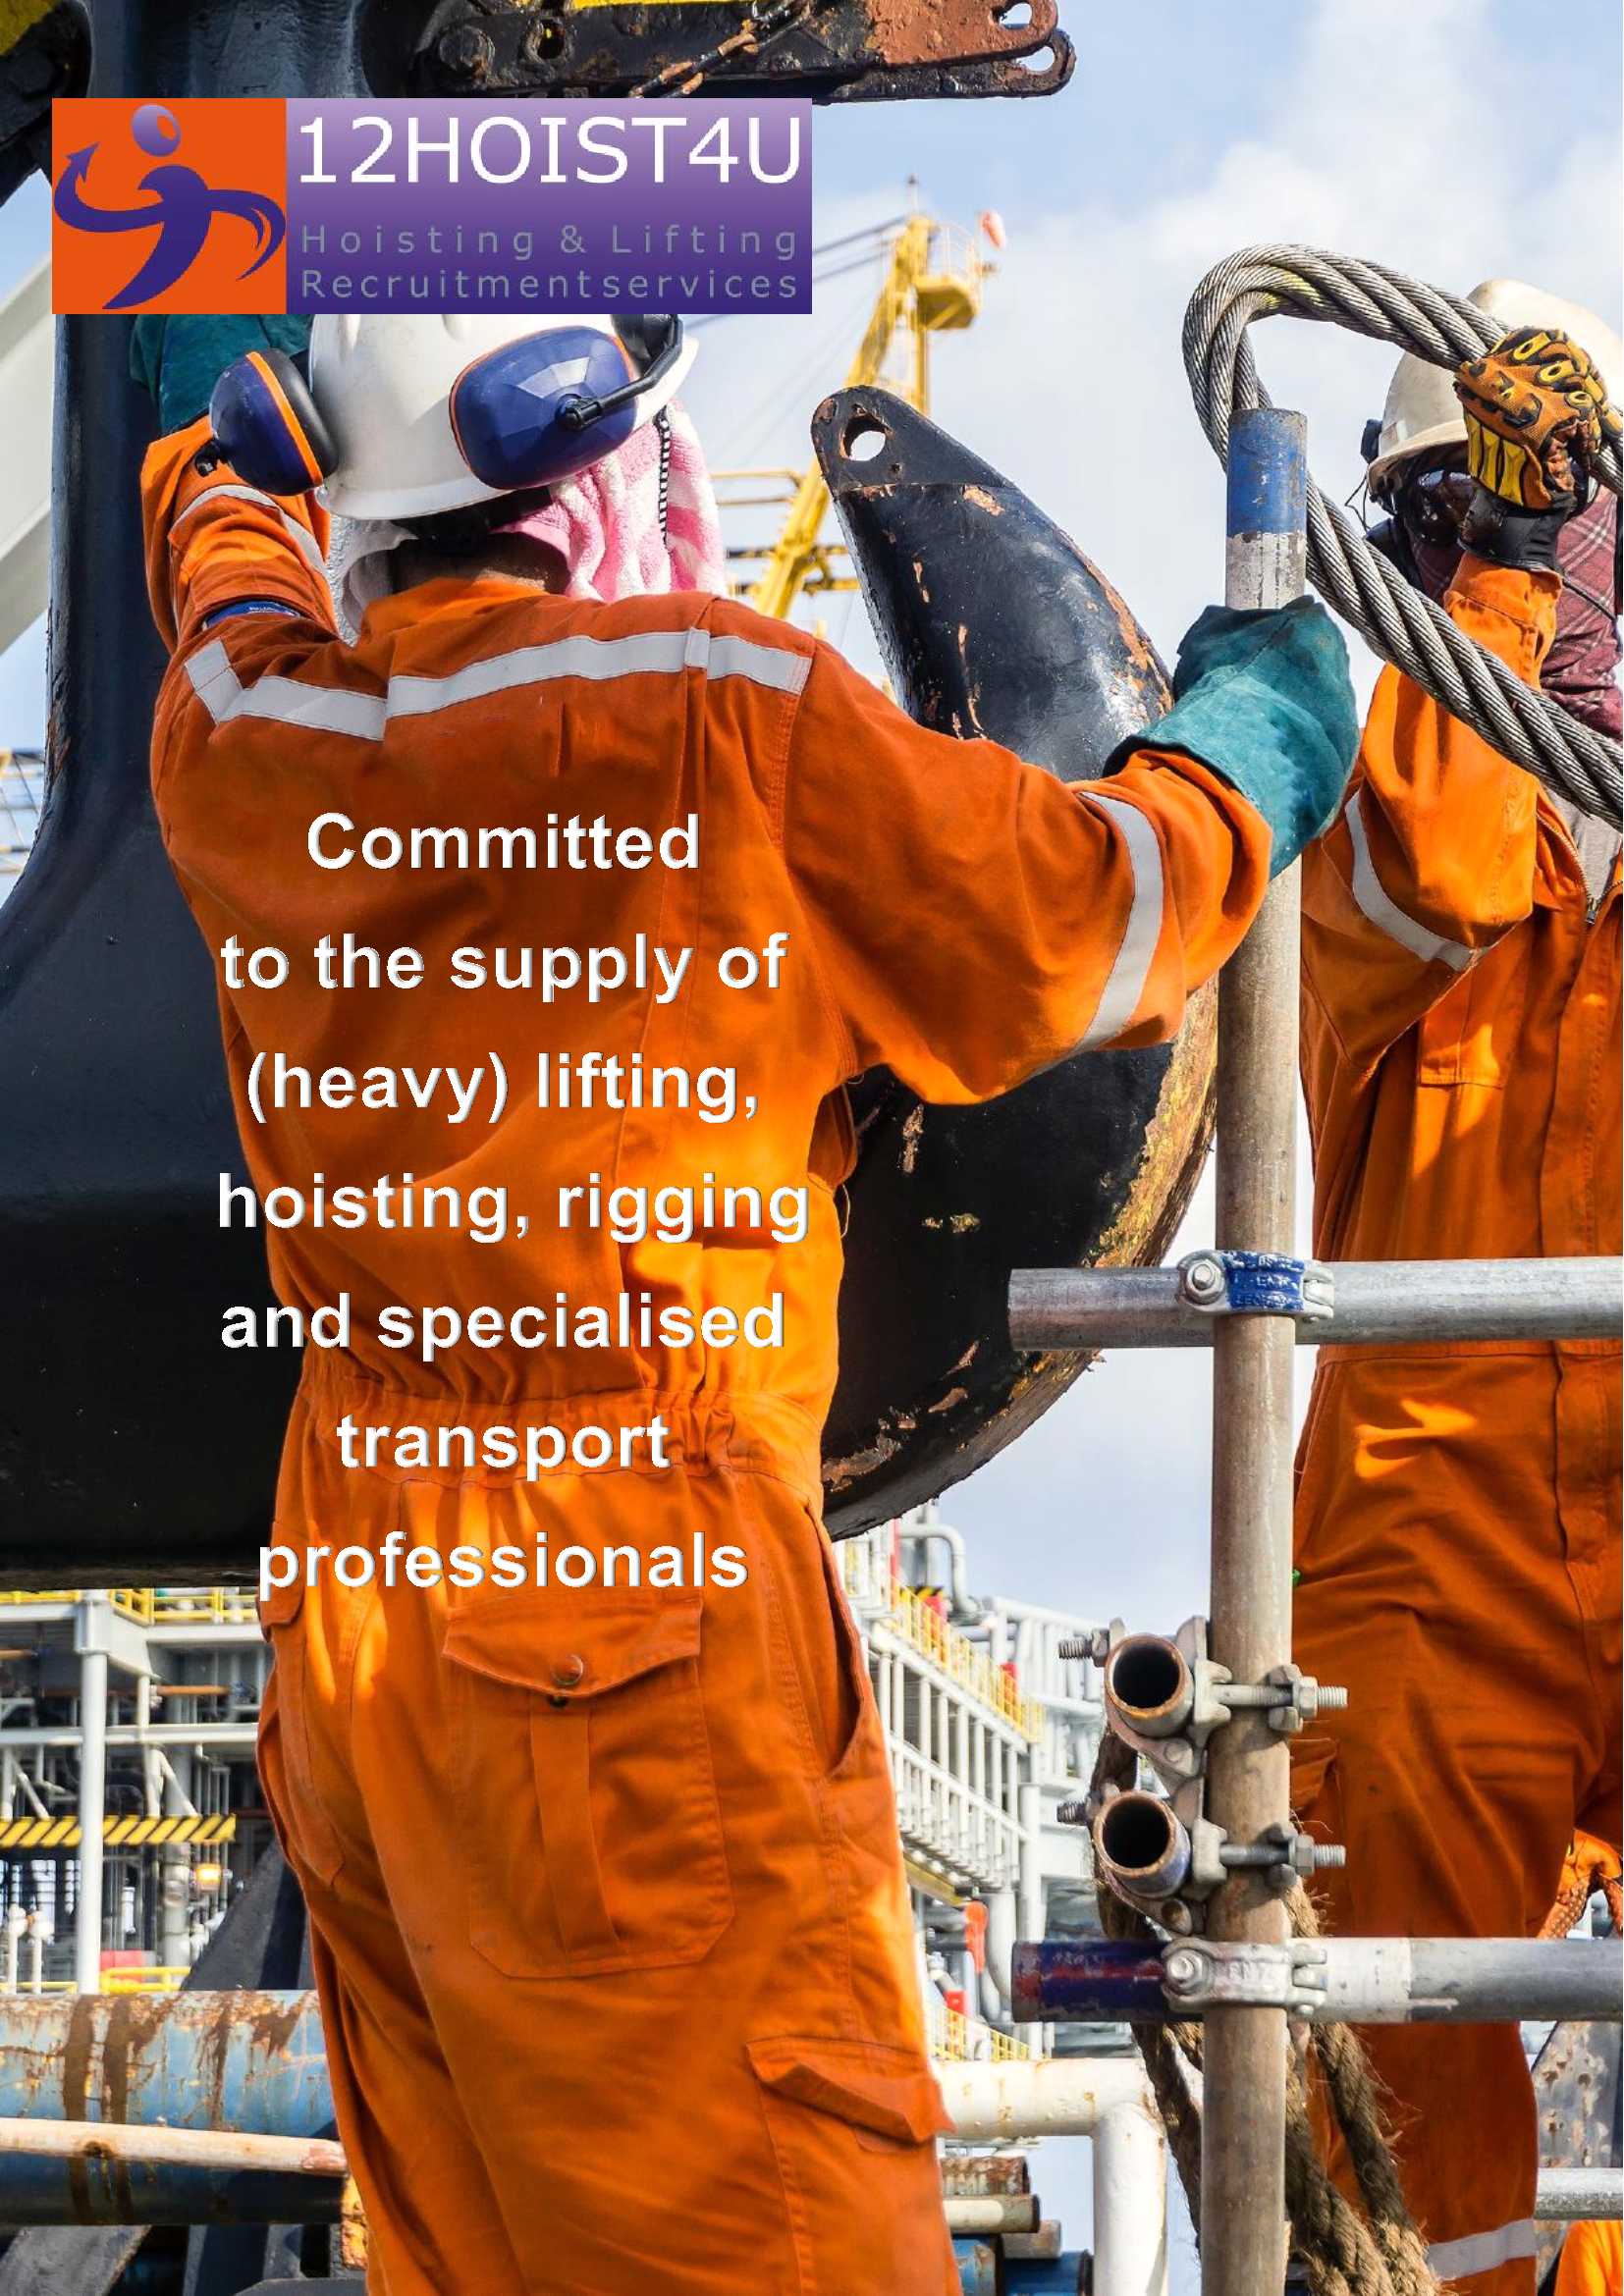 12hoist4u for your (heavy) lifting, hoisting, rigging and specialised transport personnel